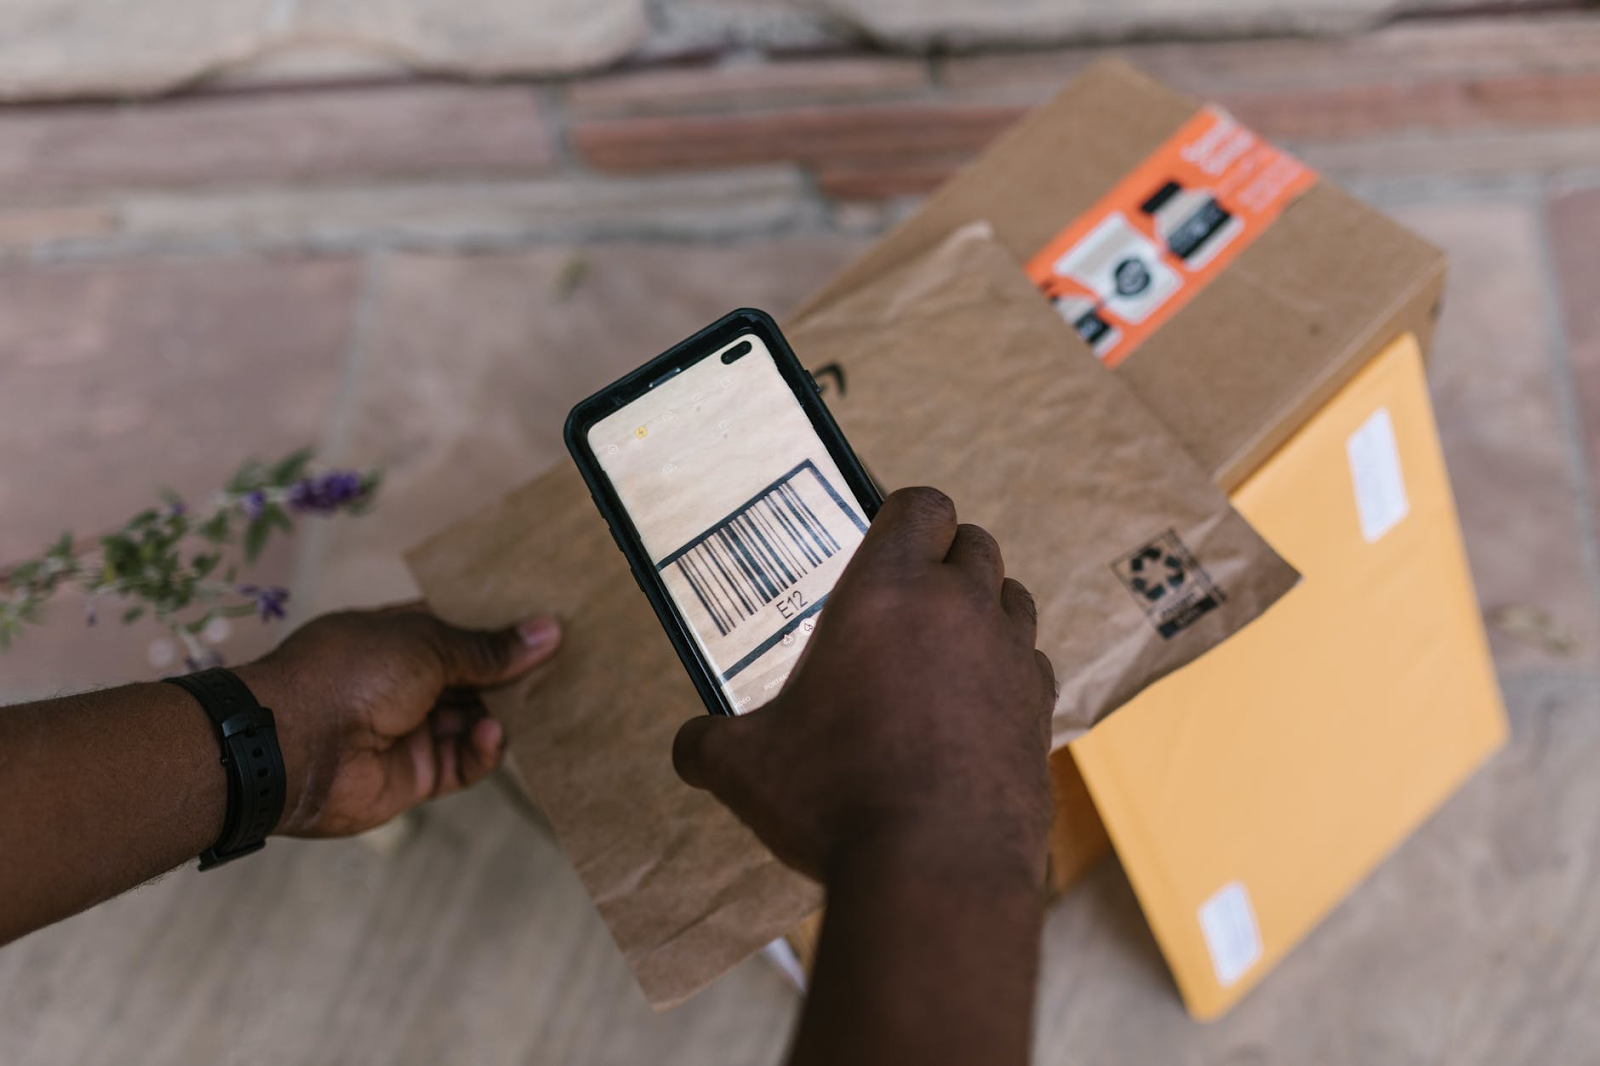 What is the inventory management barcode?